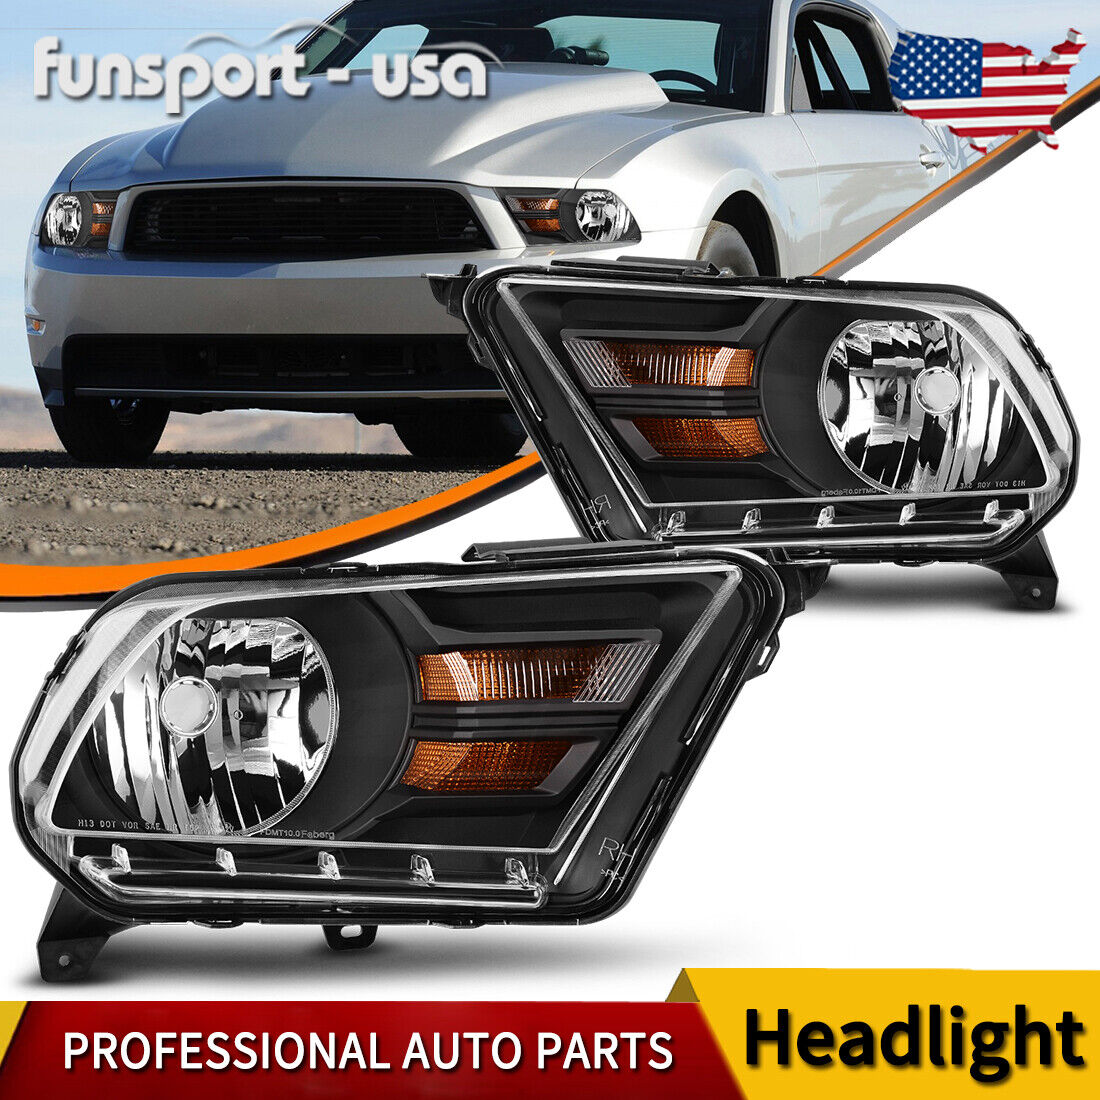 FRONT HEADLIGHTS FOR 2010-2014 FORD MUSTANG BLACK HOUSING AMBER CORNER HEADLAMPS